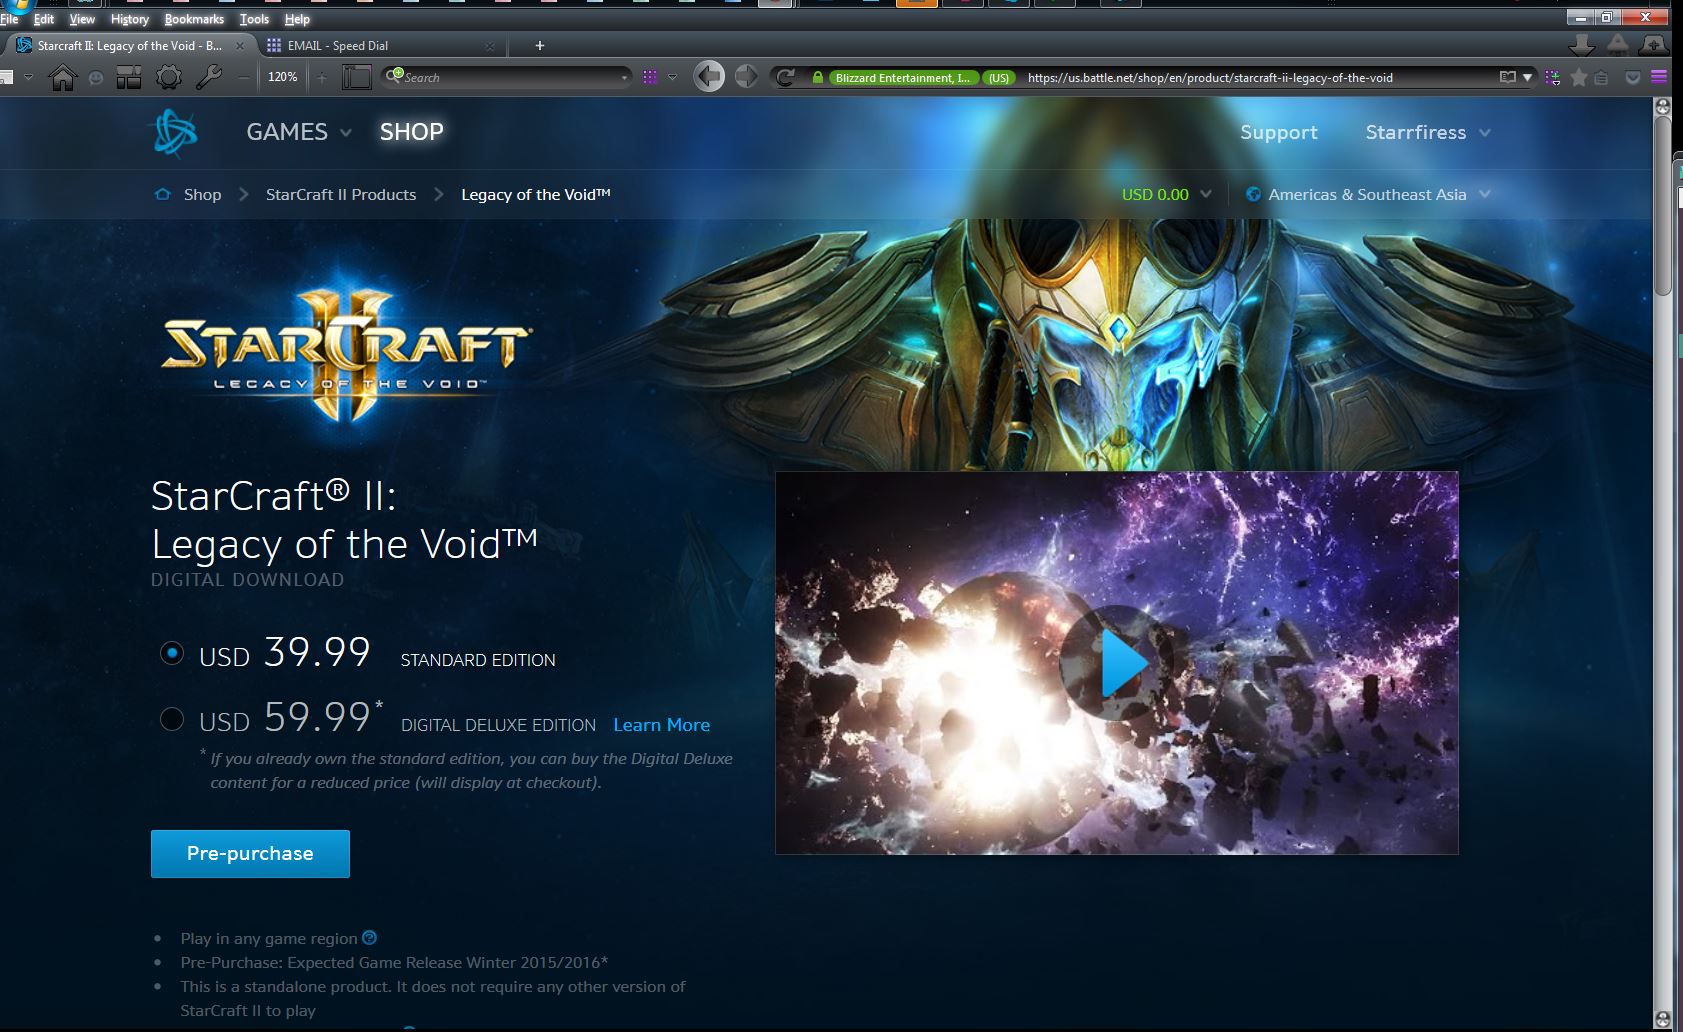 Voices of the void craft. Старкрафт Legacy of the Void. STARCRAFT 2 Legacy og the Void. STARCRAFT 2 Deluxe Edition. STARCRAFT II Legacy of the Void.